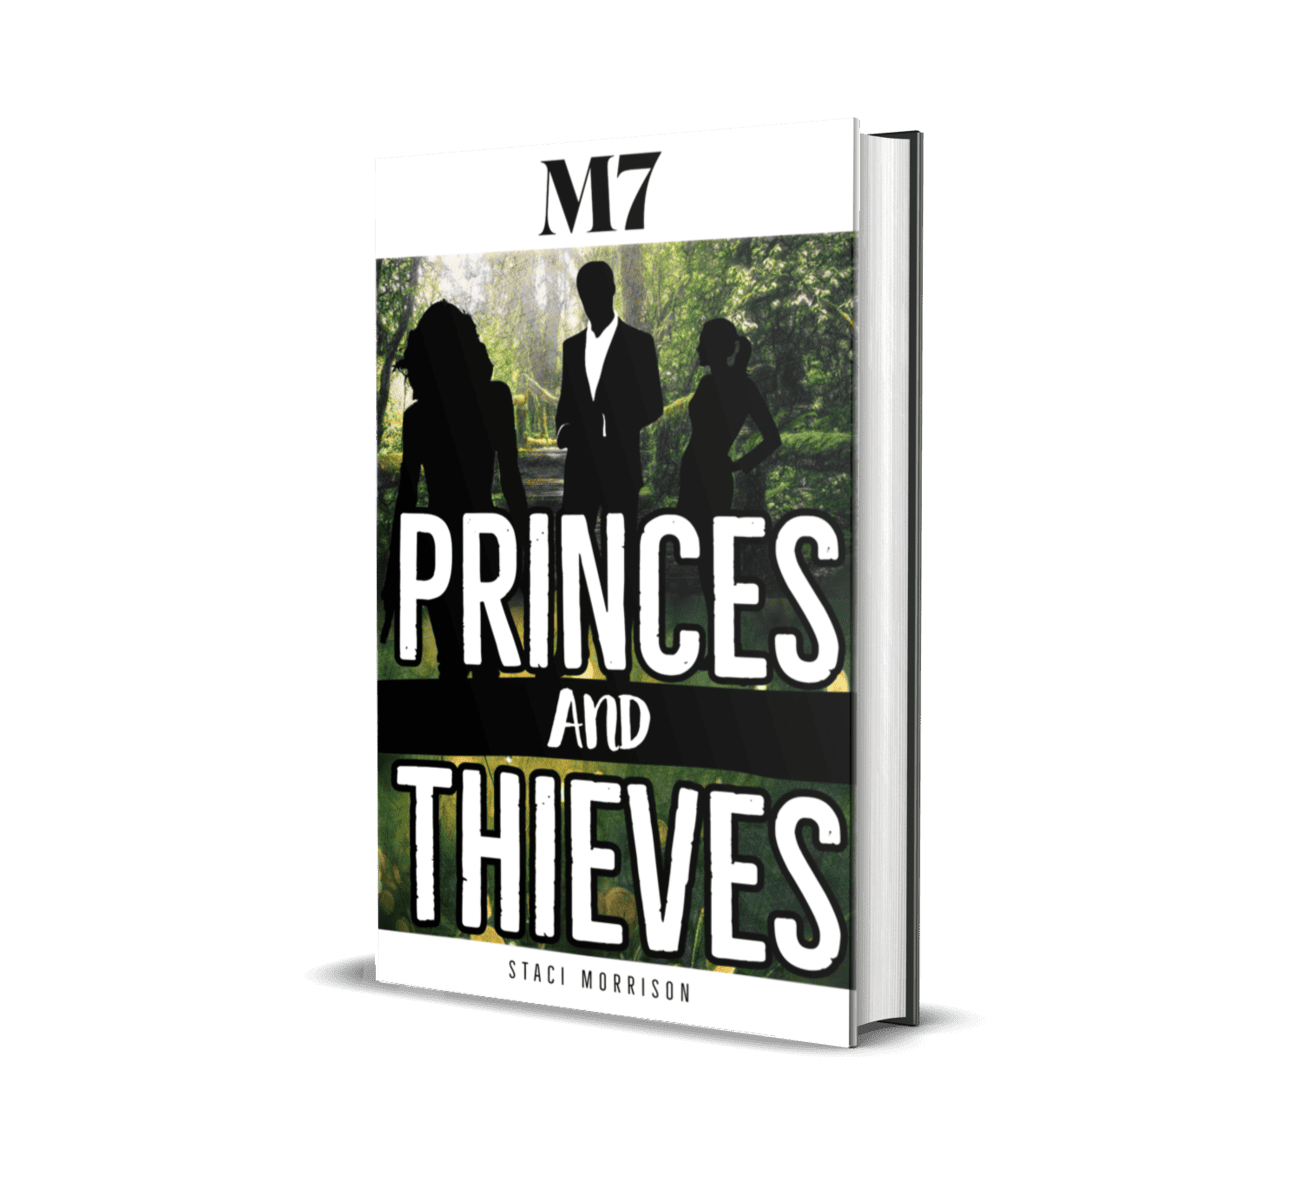 M7, princes and thieves cover, millennium series,